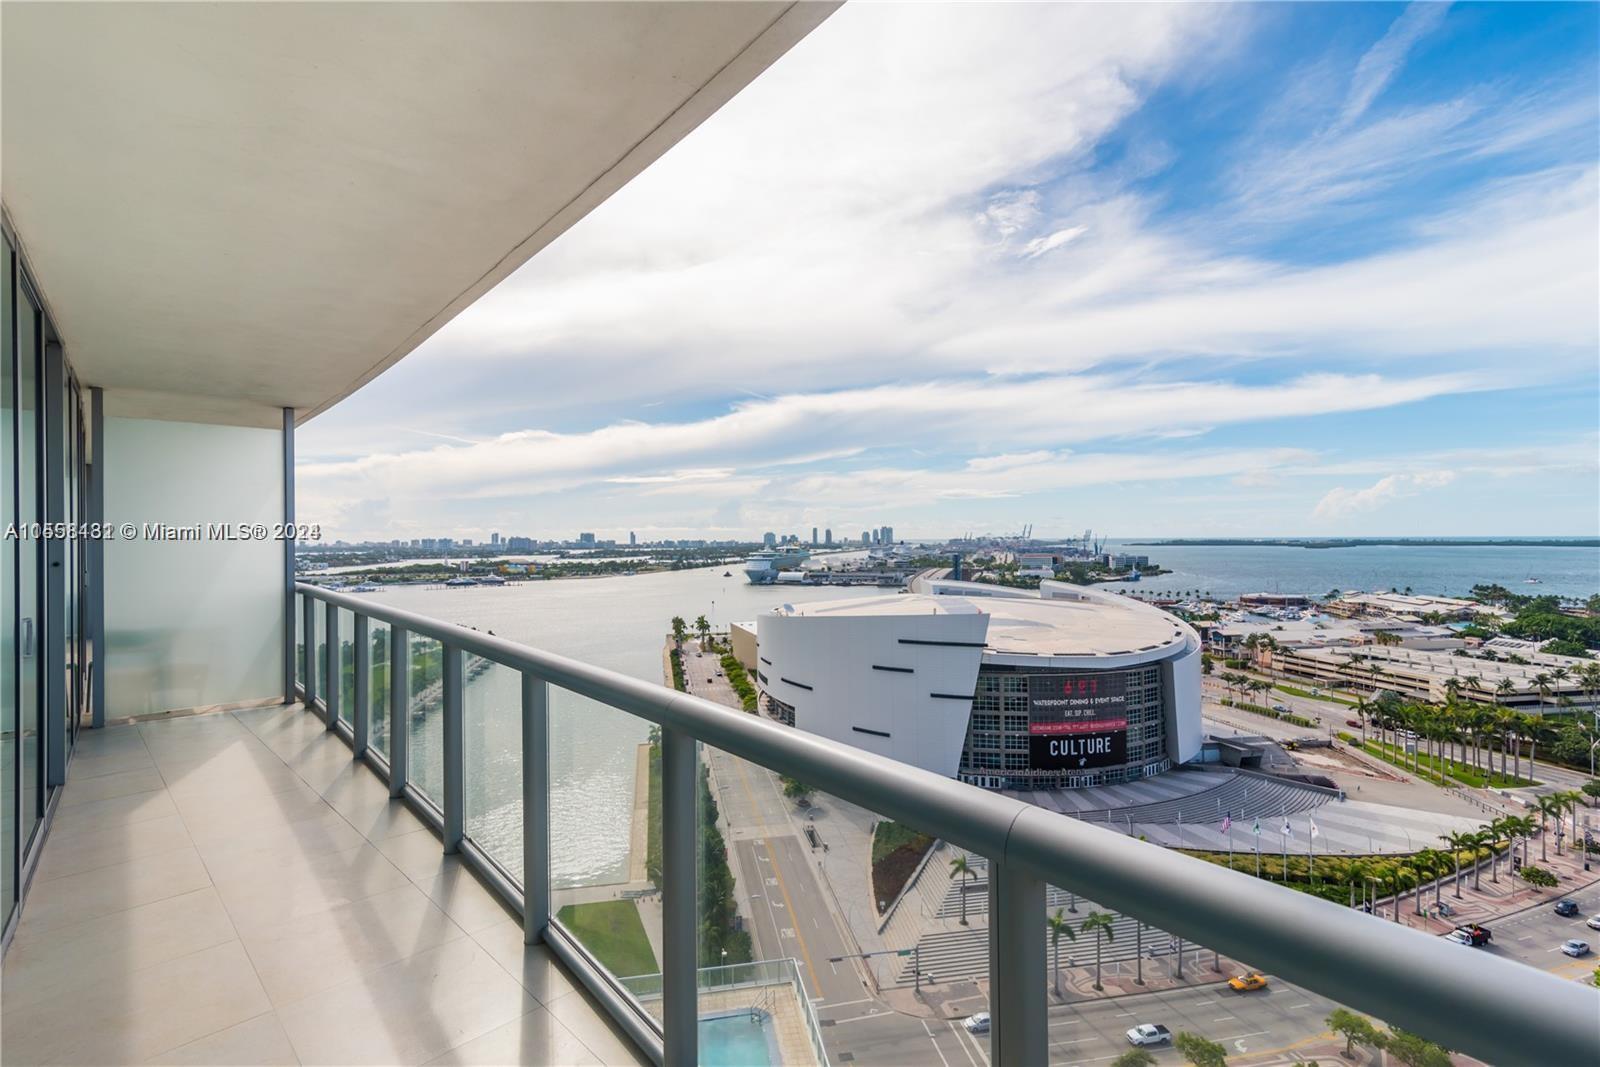 Prepare to be captivated by the stunning city and bayfront vistas that await you in this exquisite condominium nestled in the heart of Downtown Miami! Boasting ample space with 943 square feet, this 1-bedroom, 1.5-bathroom unit also features an additional den, along with tile flooring, modern lighting fixtures, soaring 10-foot ceilings, impact-resistant windows, a customized master bedroom closet, brand-new appliances, and the convenience of a washer and dryer. The prestigious Marina Blue offers an array of lavish amenities, including a cutting-edge fitness center, two refreshing swimming pools, a stylish party room, a convenient on-site store, a well-equipped business center, and a 24-hour secured lobby.